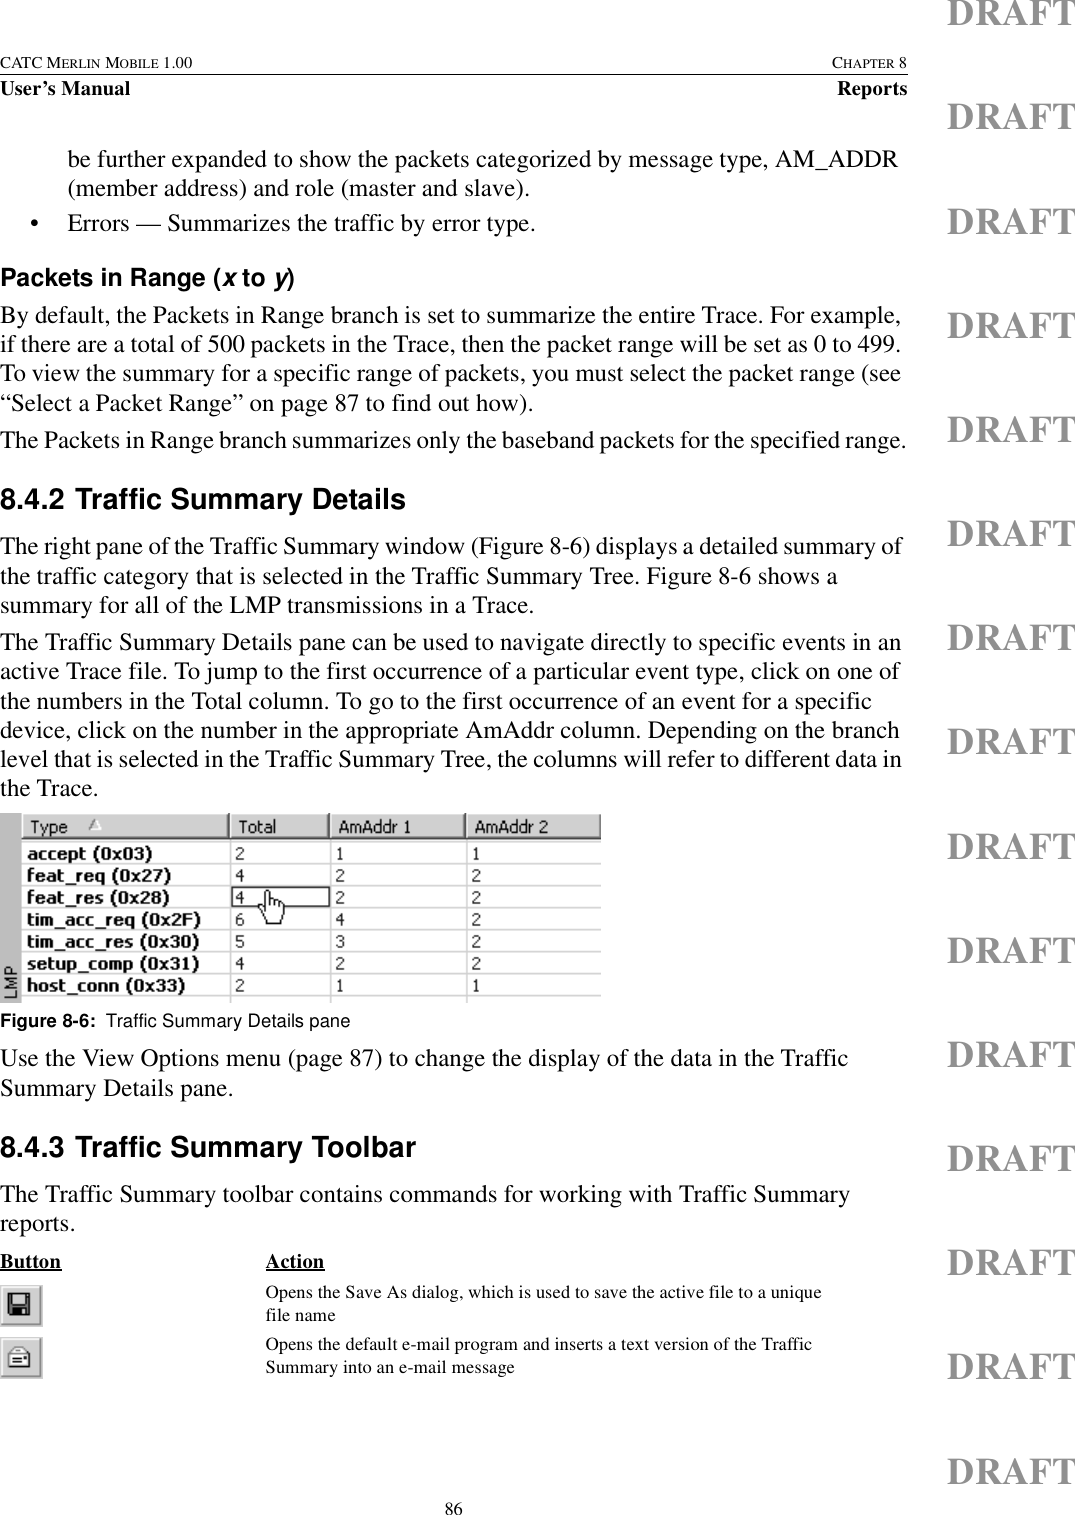 86CATC MERLIN MOBILE 1.00 CHAPTER 8User’s Manual ReportsDRAFTDRAFTDRAFTDRAFTDRAFTDRAFTDRAFTDRAFTDRAFTDRAFTDRAFTDRAFTDRAFTDRAFTDRAFTbe further expanded to show the packets categorized by message type, AM_ADDR (member address) and role (master and slave).• Errors — Summarizes the traffic by error type.Packets in Range (x to y)By default, the Packets in Range branch is set to summarize the entire Trace. For example, if there are a total of 500 packets in the Trace, then the packet range will be set as 0 to 499. To view the summary for a specific range of packets, you must select the packet range (see “Select a Packet Range” on page 87 to find out how).The Packets in Range branch summarizes only the baseband packets for the specified range.8.4.2 Traffic Summary DetailsThe right pane of the Traffic Summary window (Figure 8-6) displays a detailed summary of the traffic category that is selected in the Traffic Summary Tree. Figure 8-6 shows a summary for all of the LMP transmissions in a Trace.The Traffic Summary Details pane can be used to navigate directly to specific events in an active Trace file. To jump to the first occurrence of a particular event type, click on one of the numbers in the Total column. To go to the first occurrence of an event for a specific device, click on the number in the appropriate AmAddr column. Depending on the branch level that is selected in the Traffic Summary Tree, the columns will refer to different data in the Trace. Use the View Options menu (page 87) to change the display of the data in the Traffic Summary Details pane.8.4.3 Traffic Summary ToolbarThe Traffic Summary toolbar contains commands for working with Traffic Summary reports.Figure 8-6:  Traffic Summary Details paneButton ActionOpens the Save As dialog, which is used to save the active file to a unique file nameOpens the default e-mail program and inserts a text version of the Traffic Summary into an e-mail message 